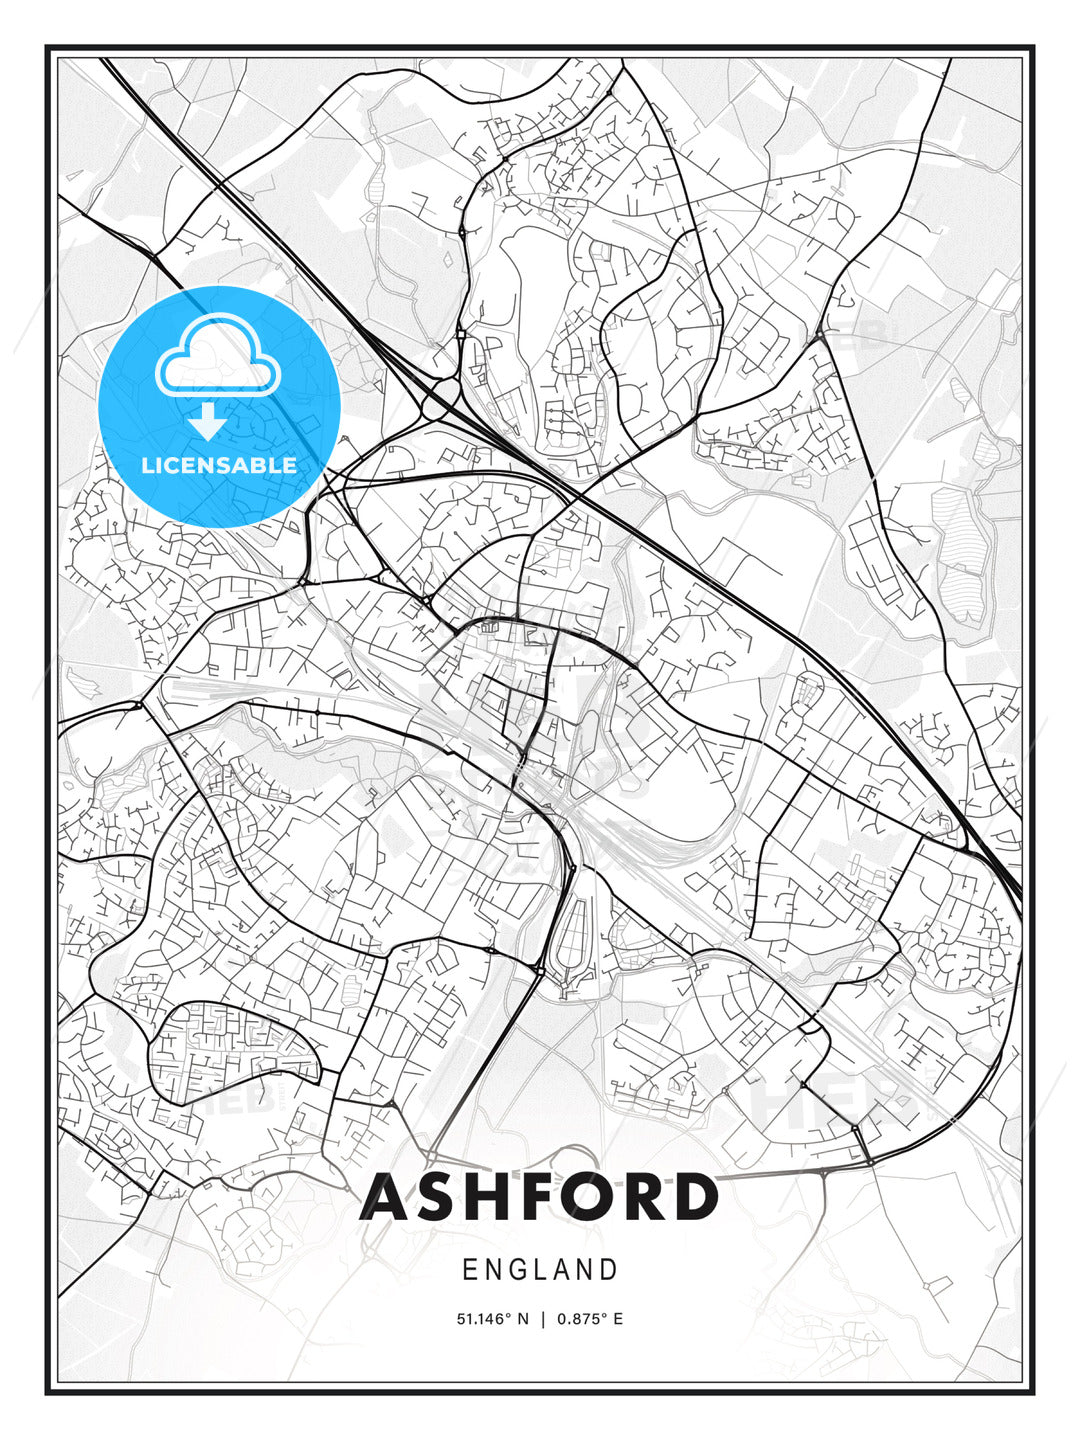 Ashford, England, Modern Print Template in Various Formats - HEBSTREITS Sketches